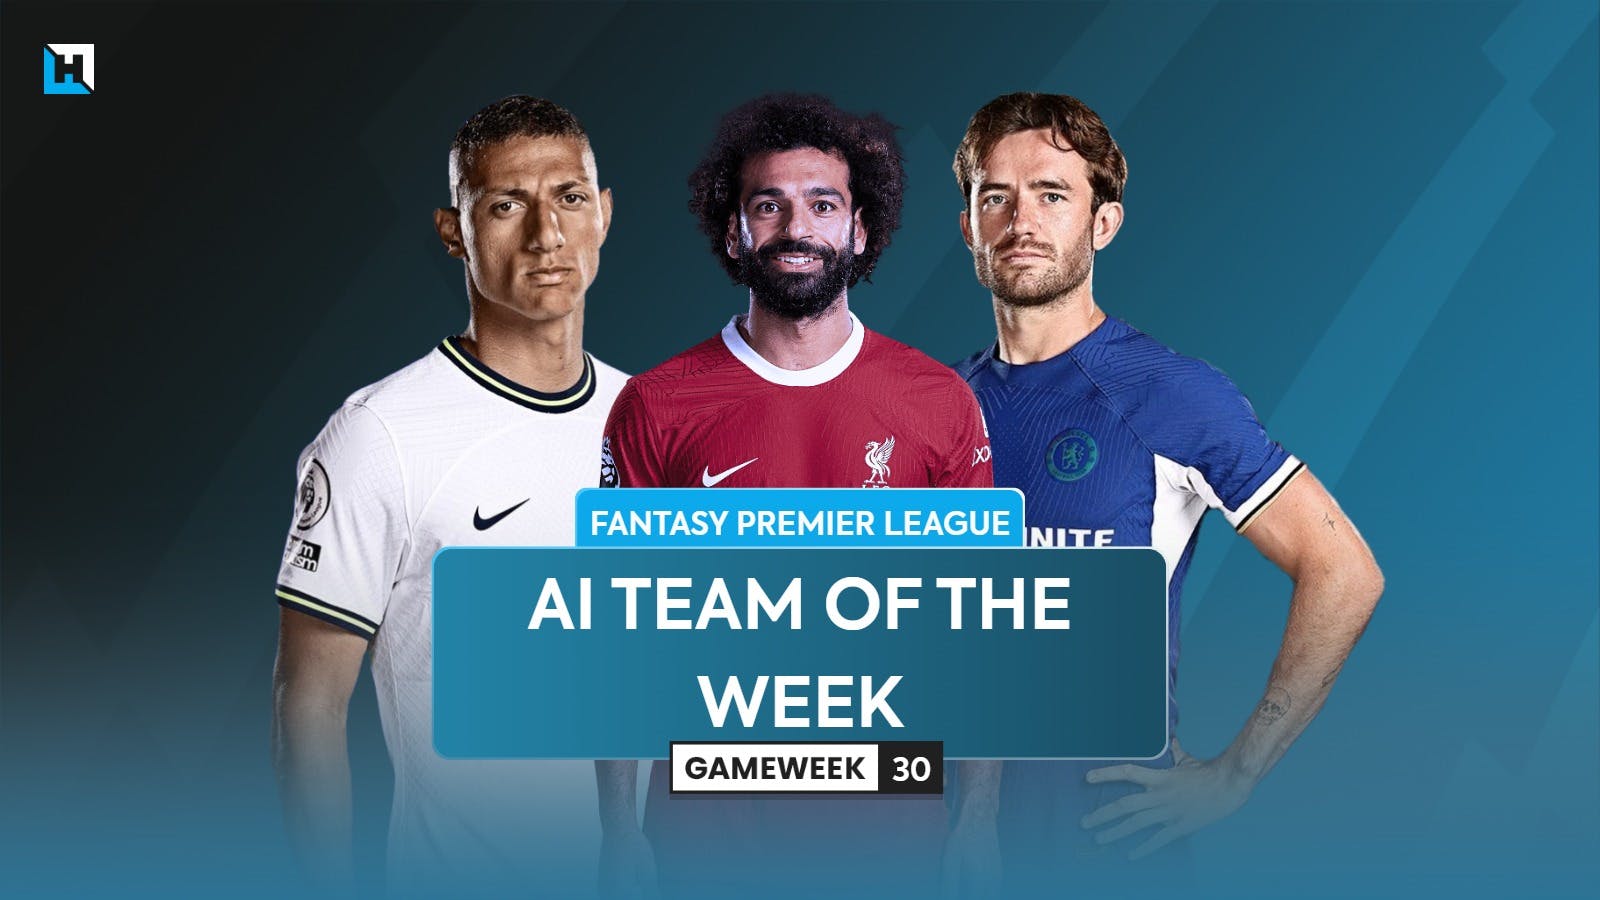 The best FPL team for Gameweek 30 according to Hub AI